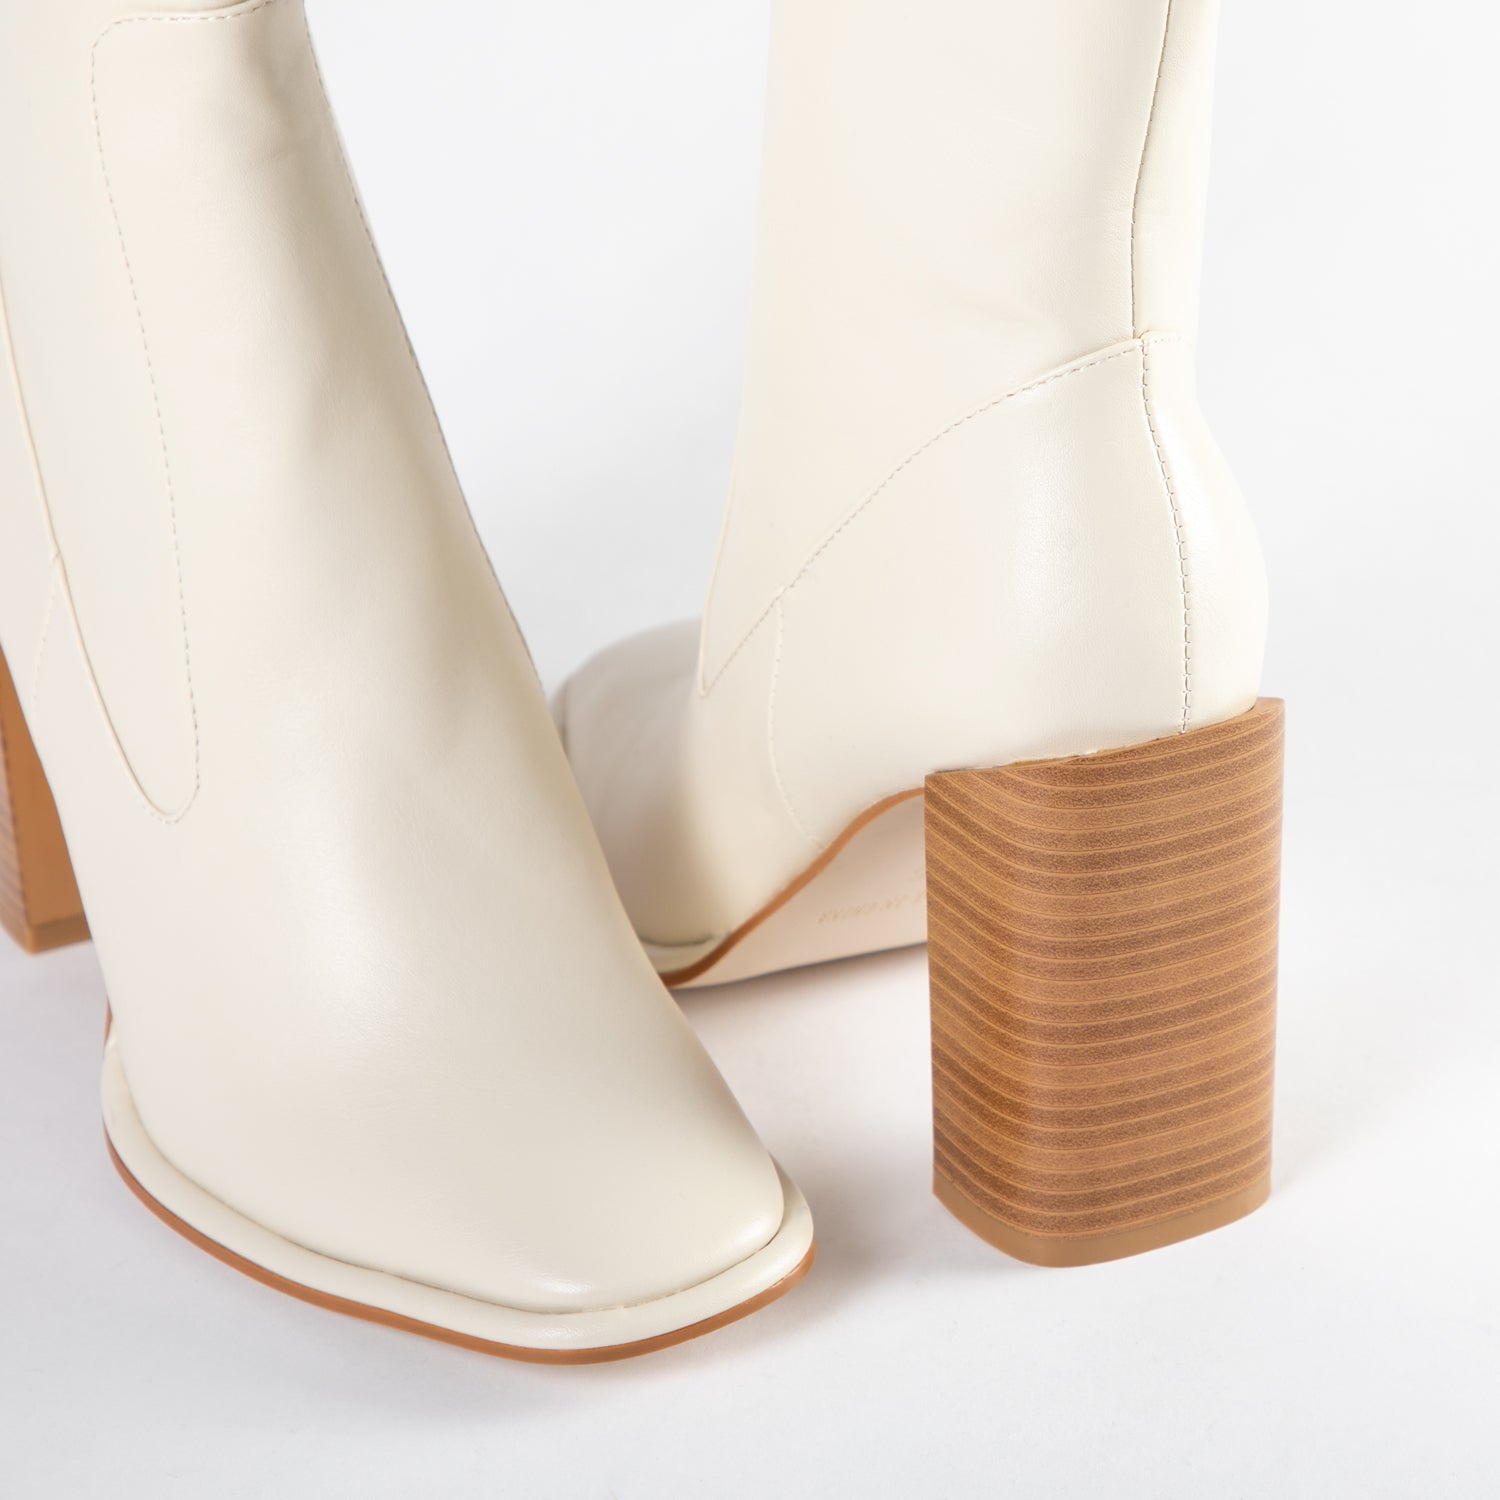 RAID Jennyl Block Heeled Ankle Boot in Off White